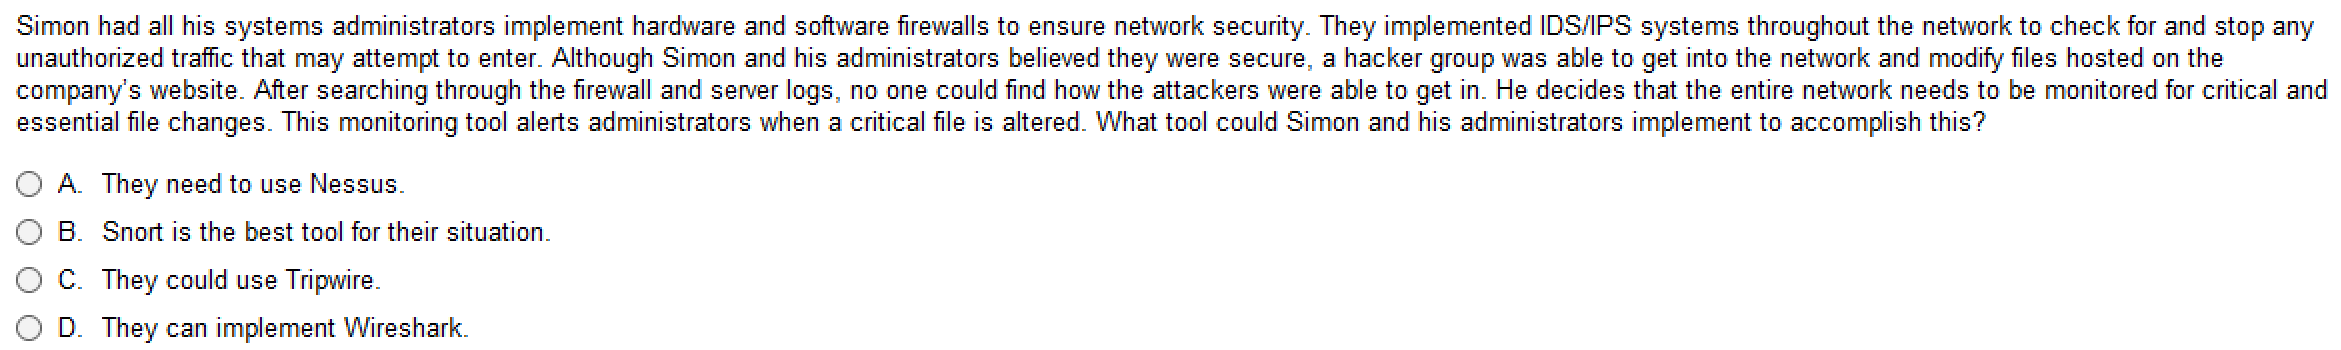 Simon had all his systems administrators implement hardware and software firewalls to ensure network